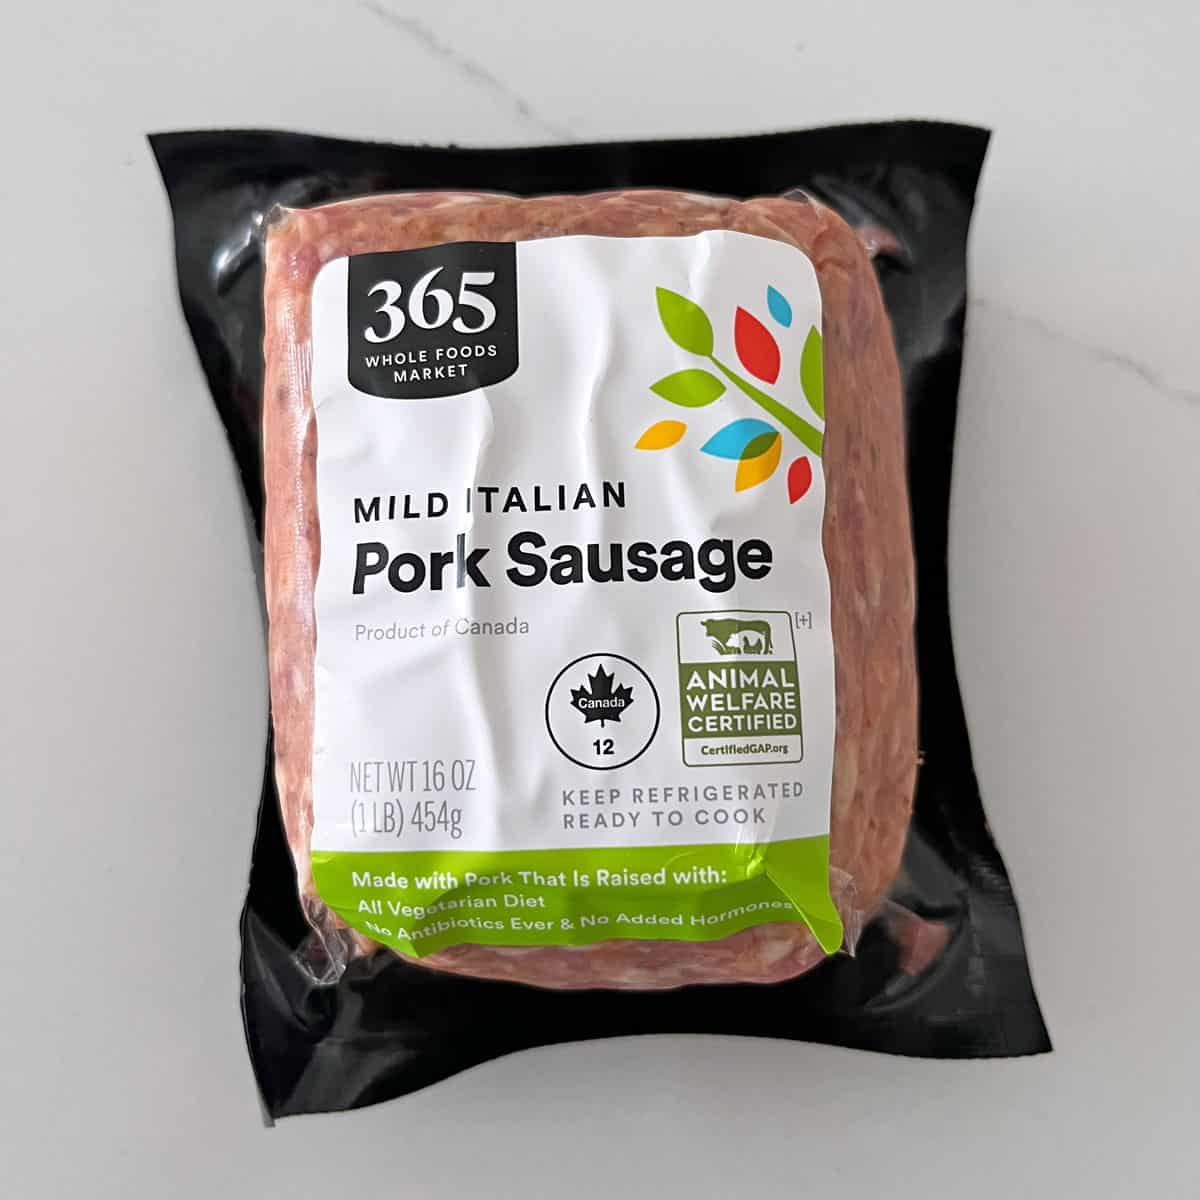 A package of pork sausage.